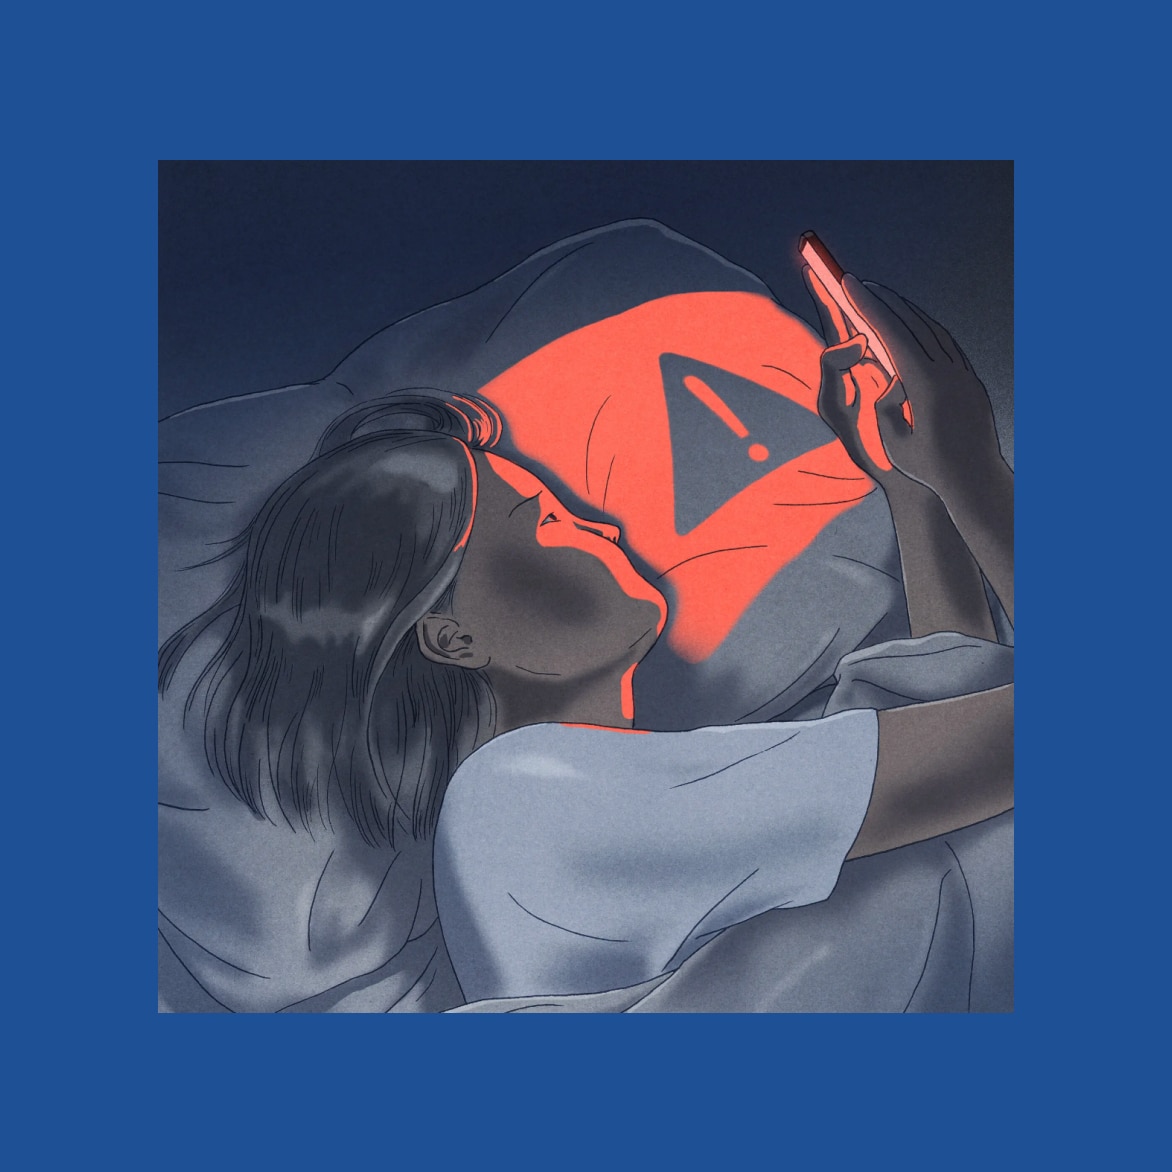 An illustration of a girl lying in bed in a darkened room. The glow from her phone illuminates her pillow with a warning sign, a triangle with an exclamation point inside it.